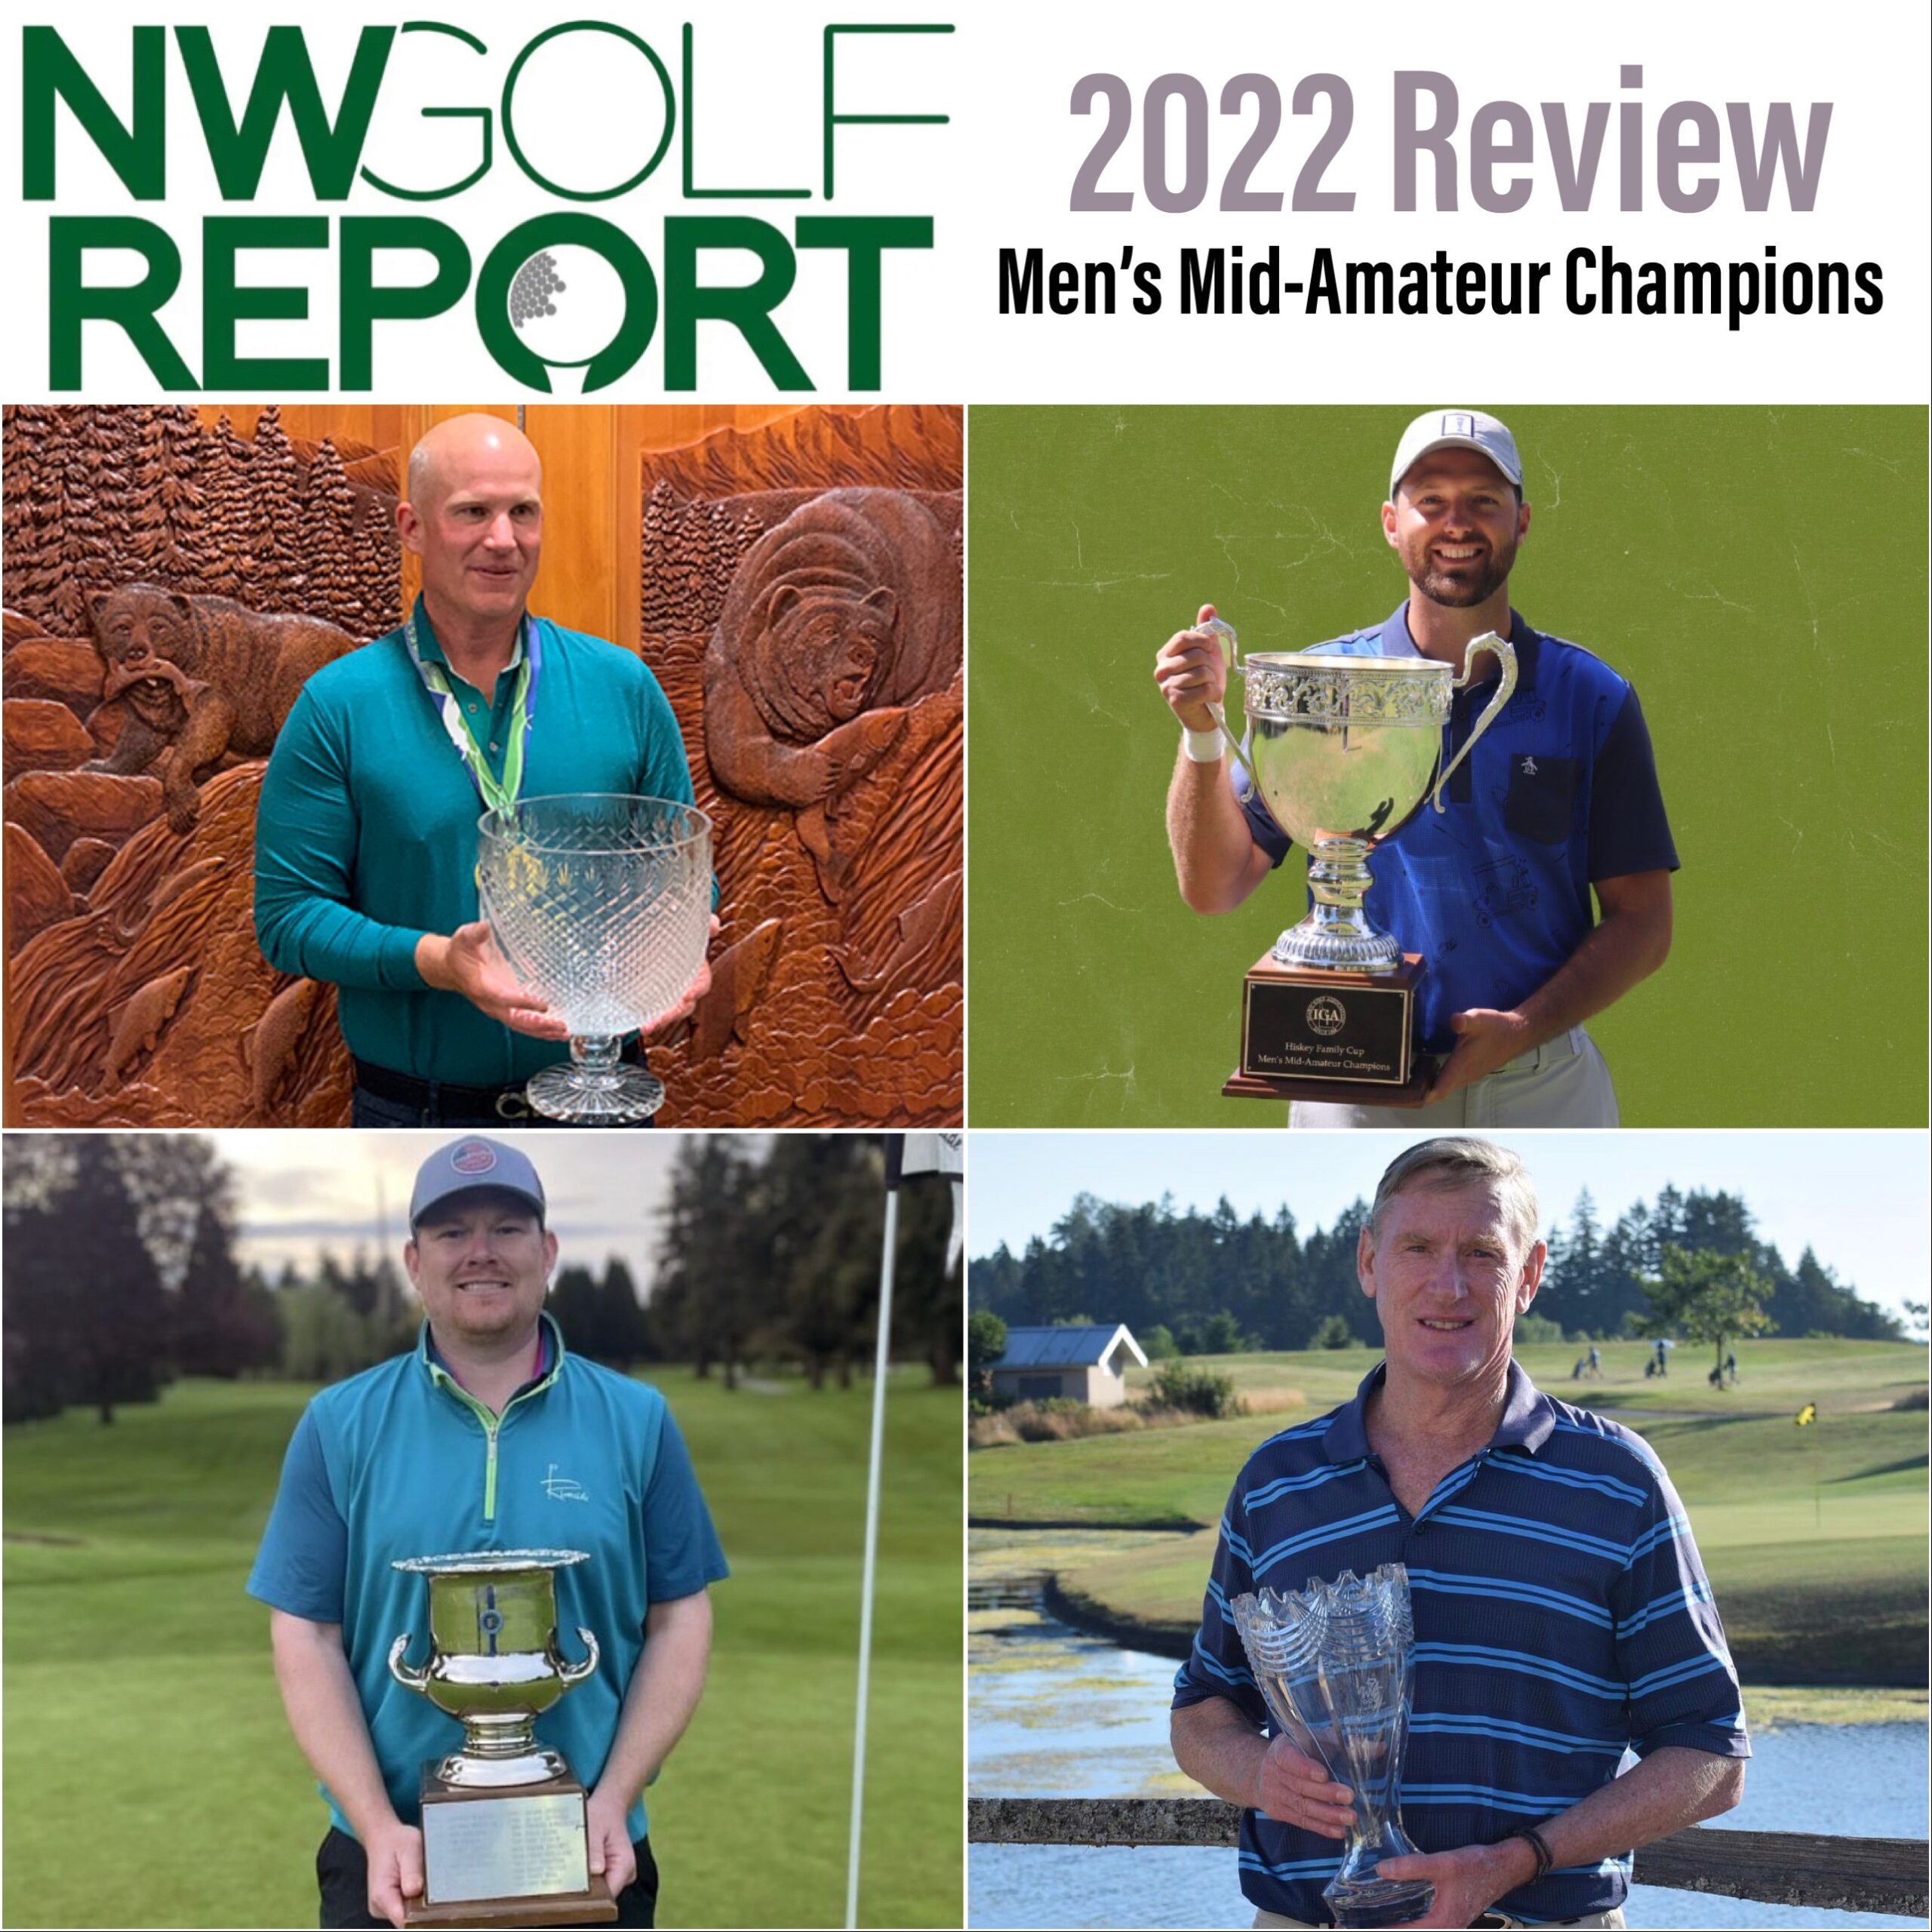 🗓2022 NW Golf Report Review Mens Mid-Amateur Champions of the NW picture